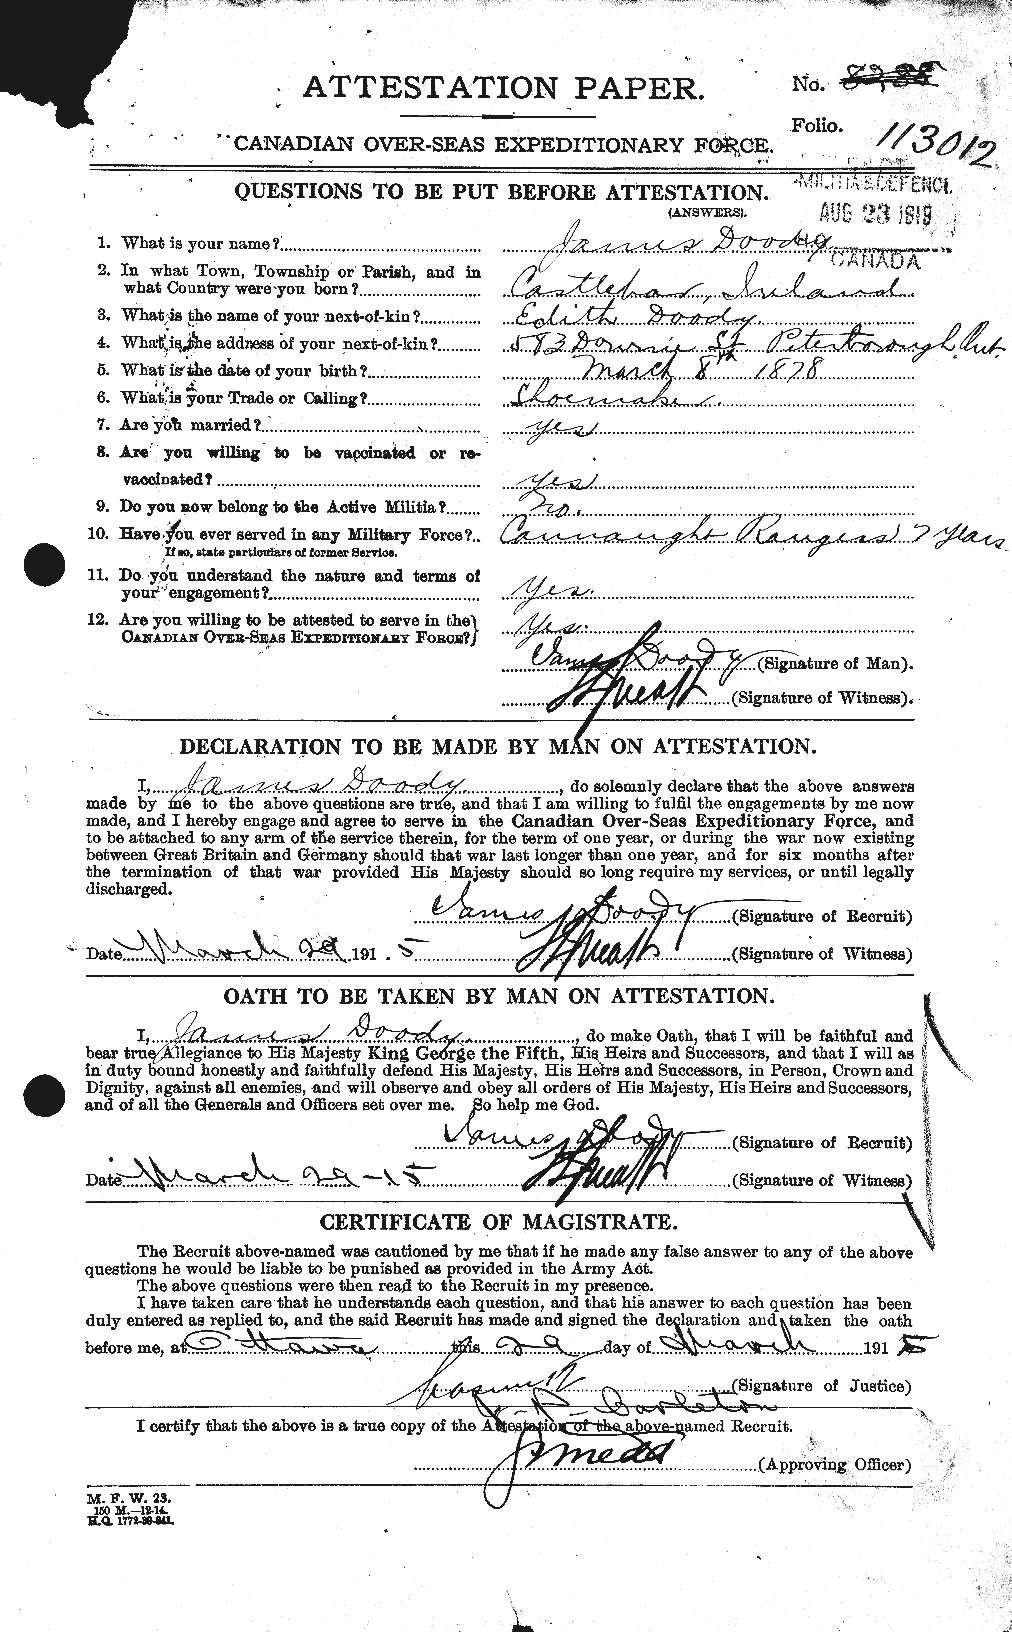 Personnel Records of the First World War - CEF 298054a